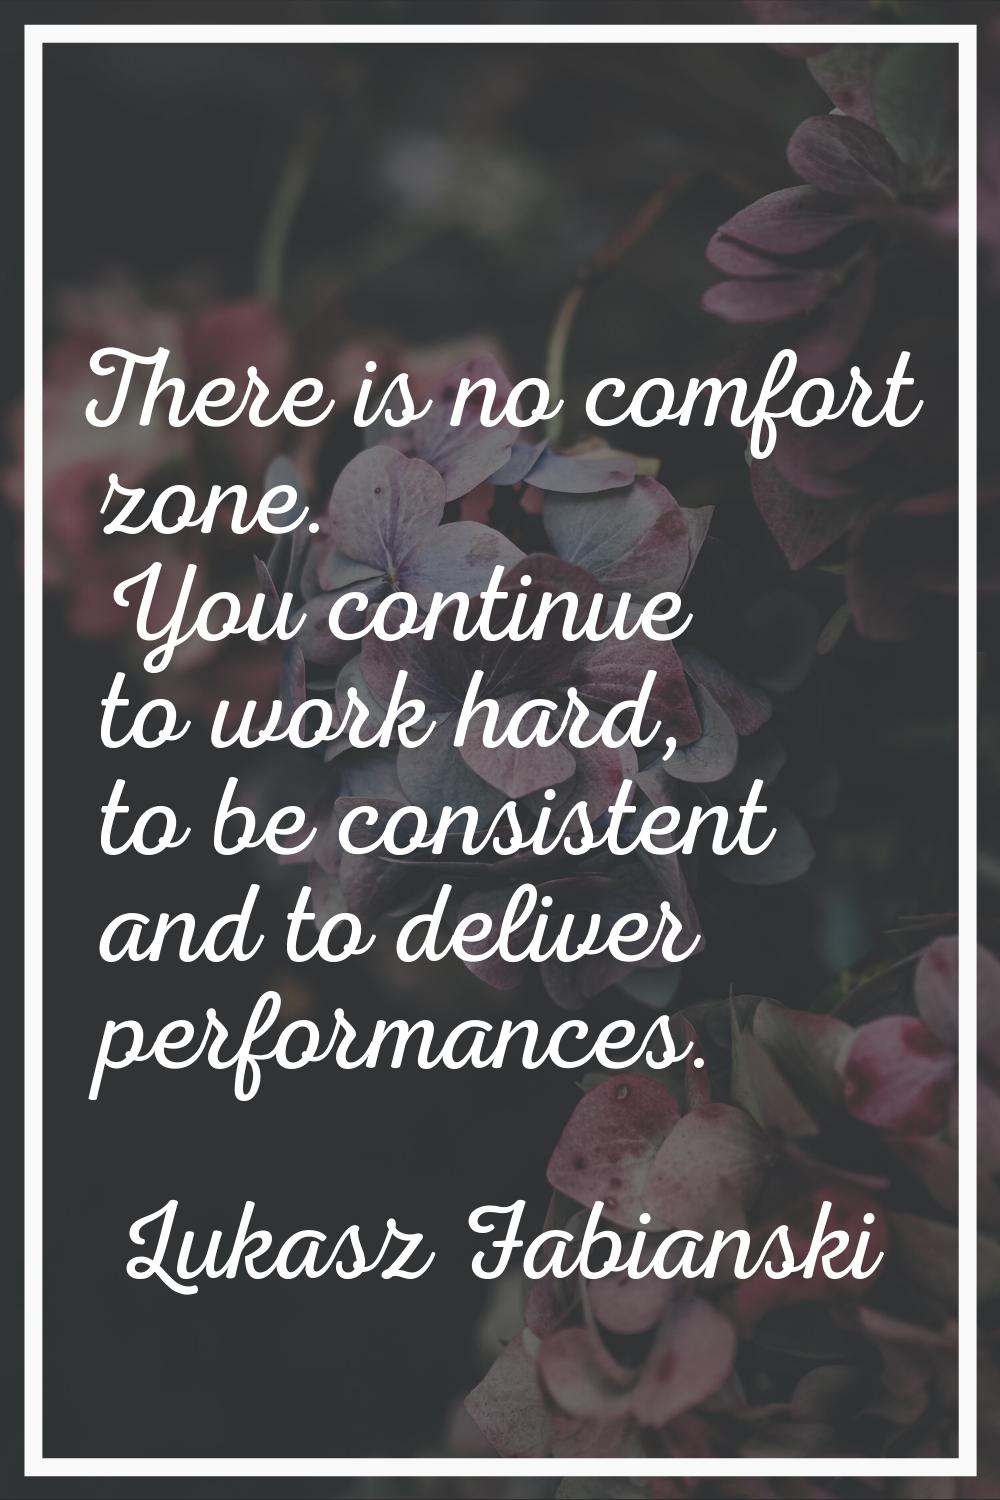 There is no comfort zone. You continue to work hard, to be consistent and to deliver performances.